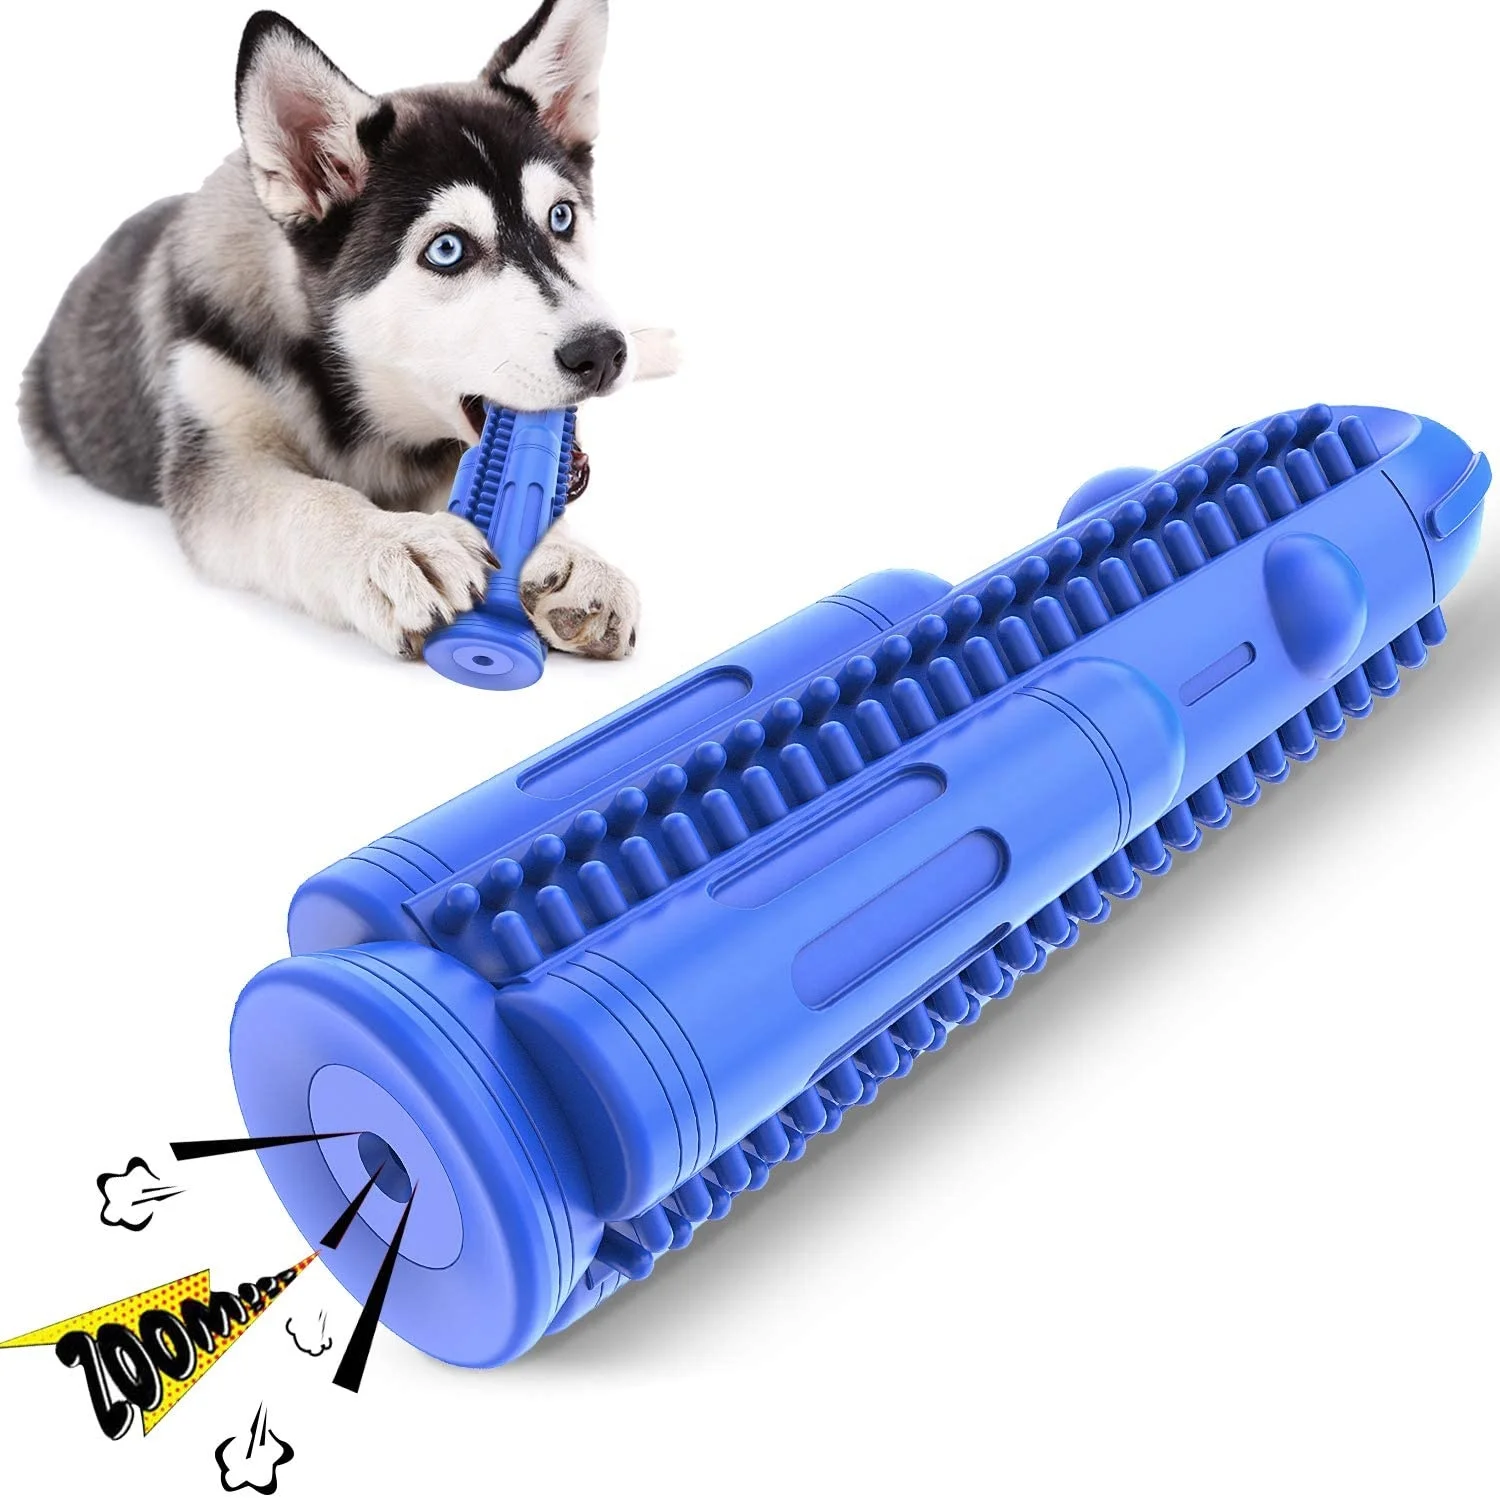 

Amazon hotsale eco friendly indestructible rubber rocket dog squeaky chew toys for aggressive chewers, Green dark blue light blue gray purple